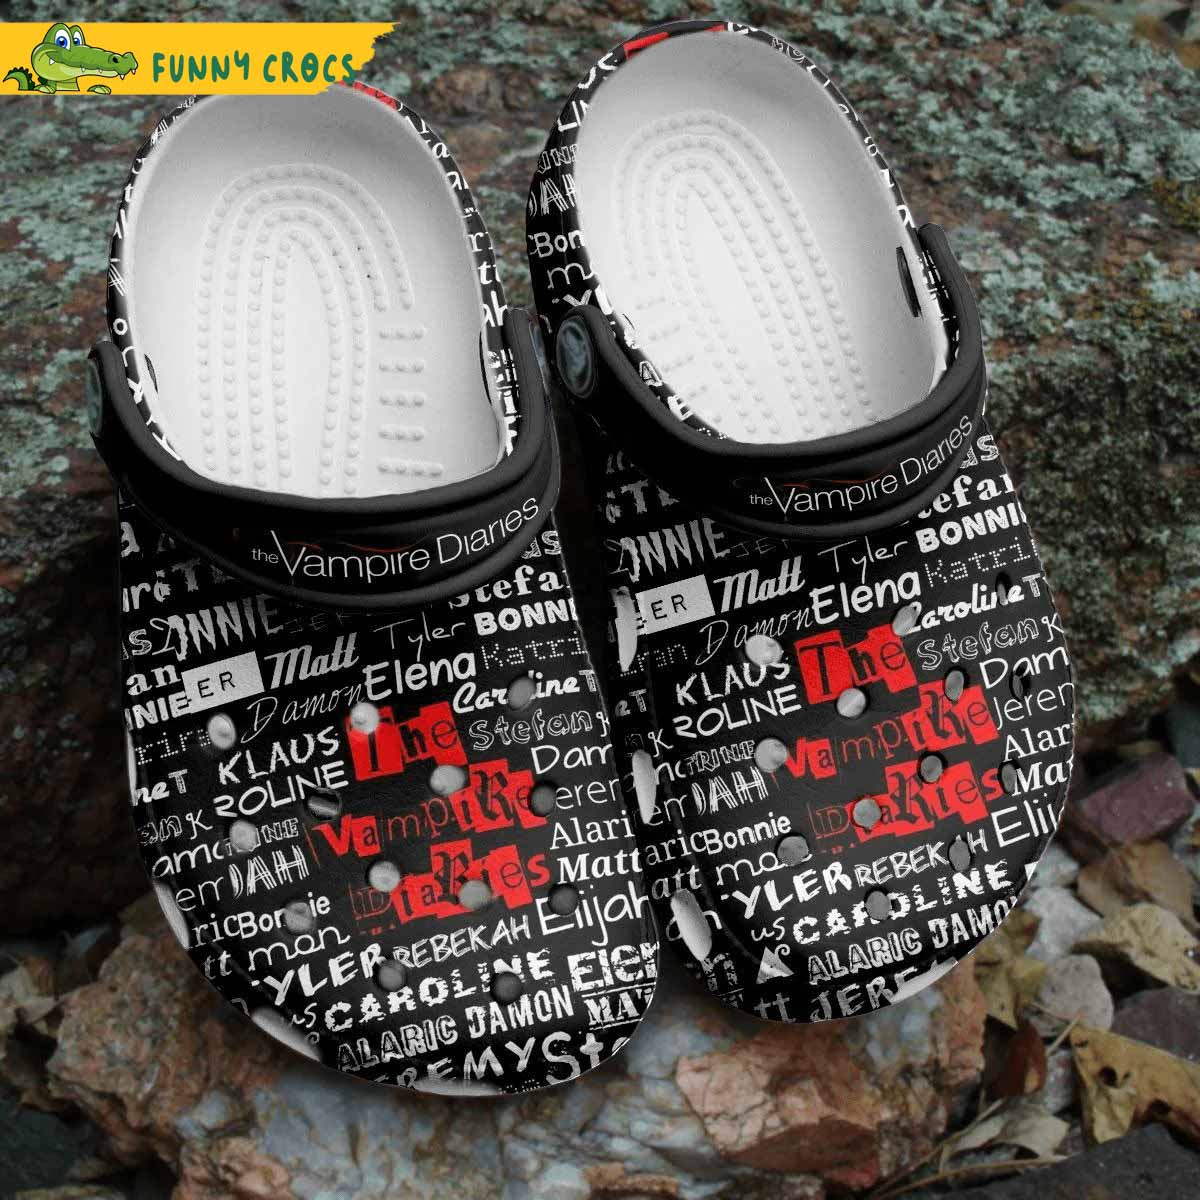 The Vampire Diaries Characters Crocs Shoes - Discover Comfort And Style ...